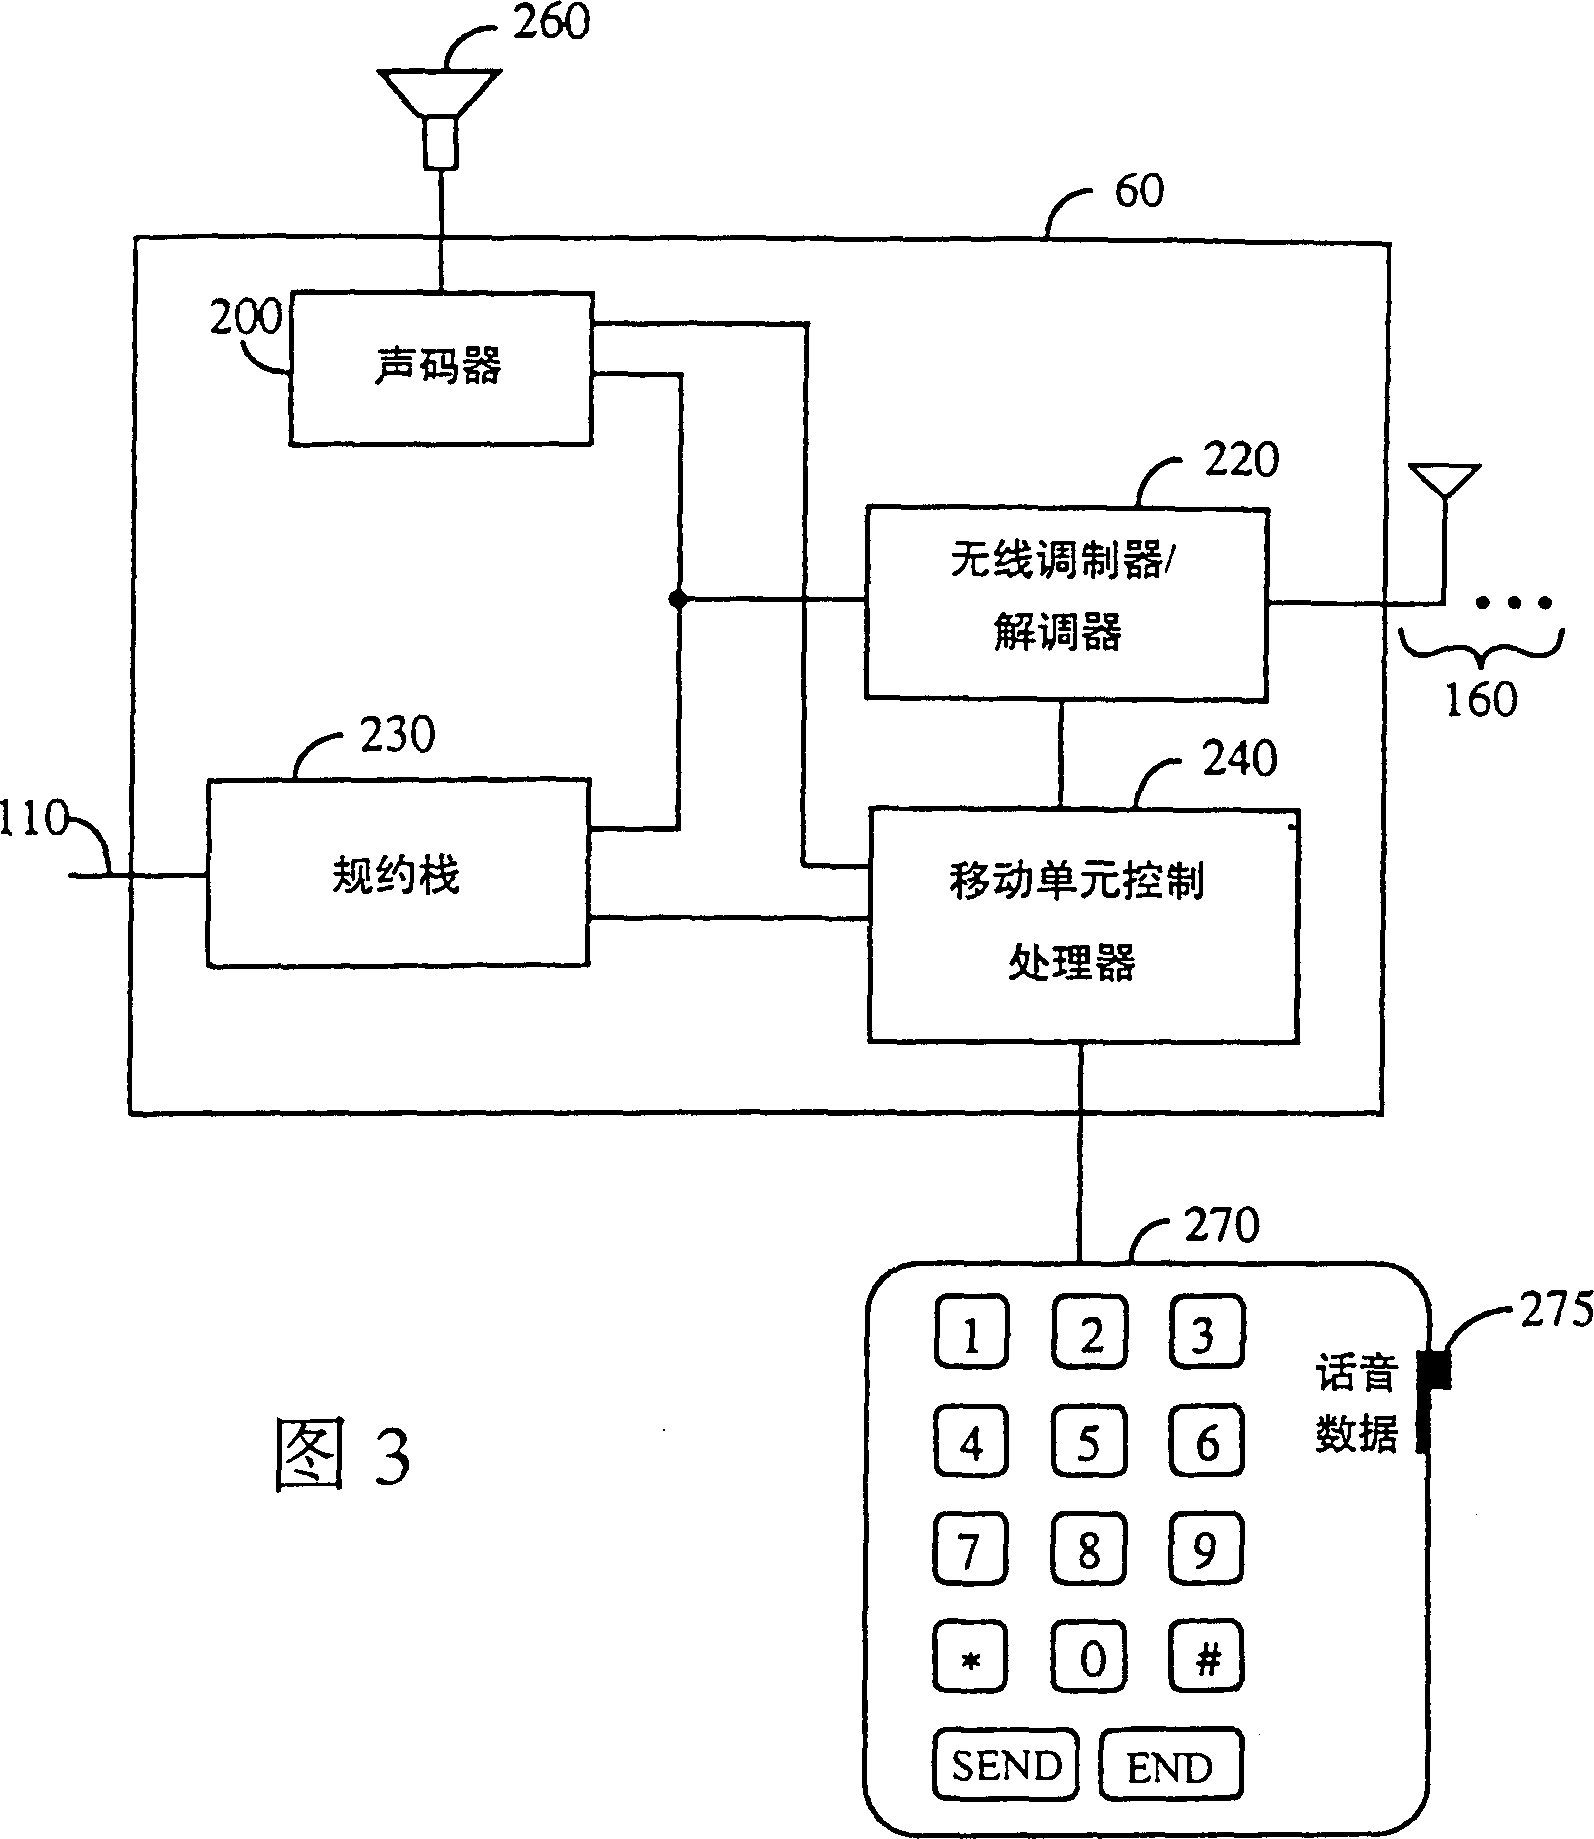 Method of invoking and cancelling voice or data service from a mobile unit